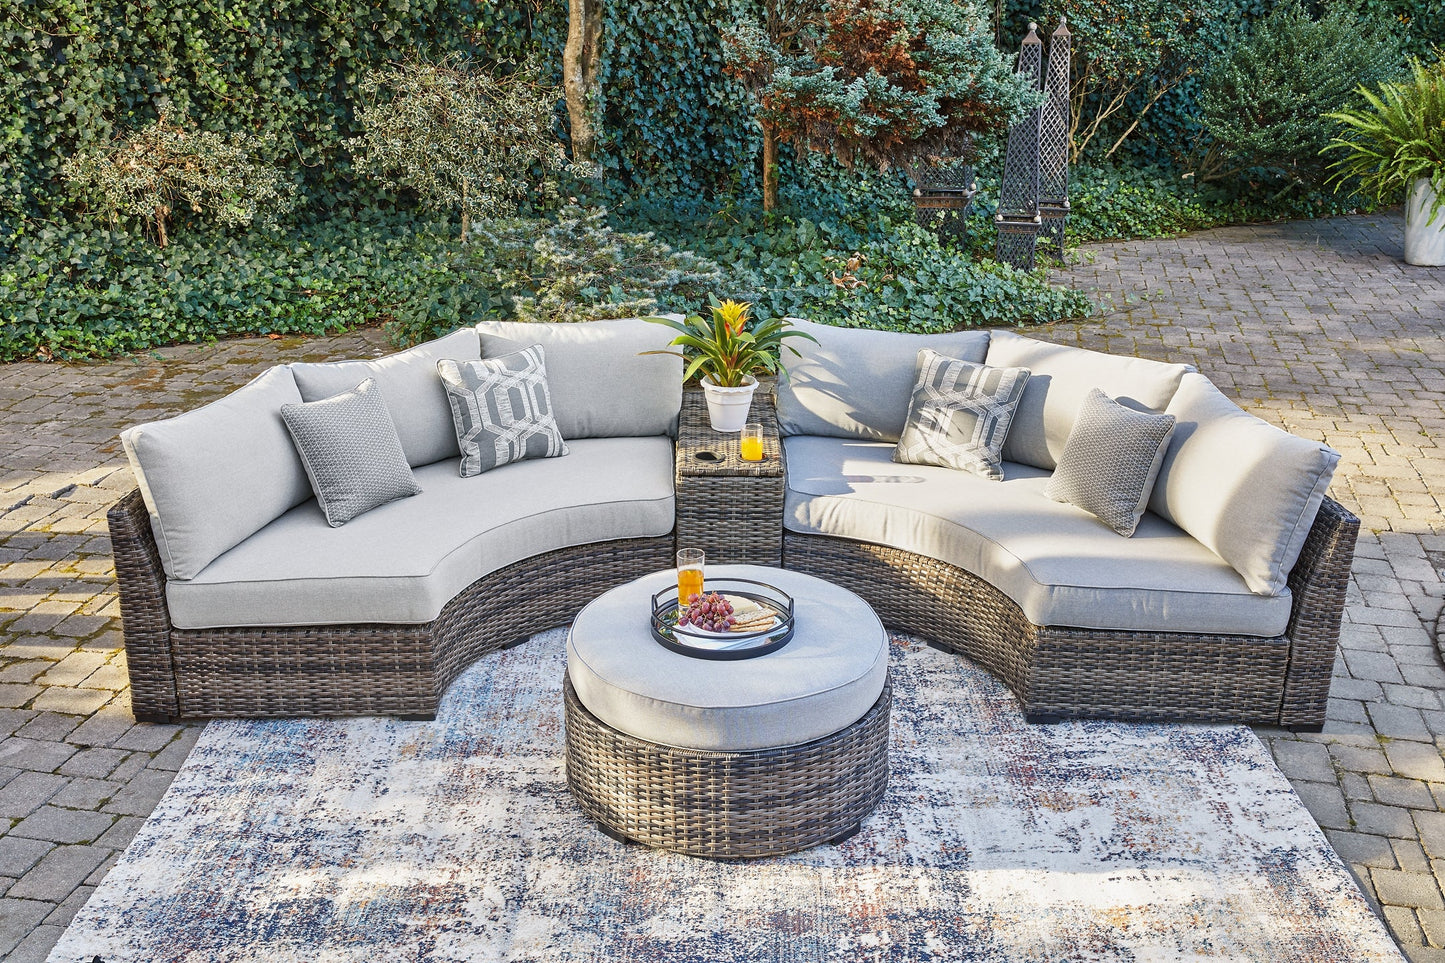 Harbor Court 3-Piece Outdoor Sectional with Ottoman at Cloud 9 Mattress & Furniture furniture, home furnishing, home decor